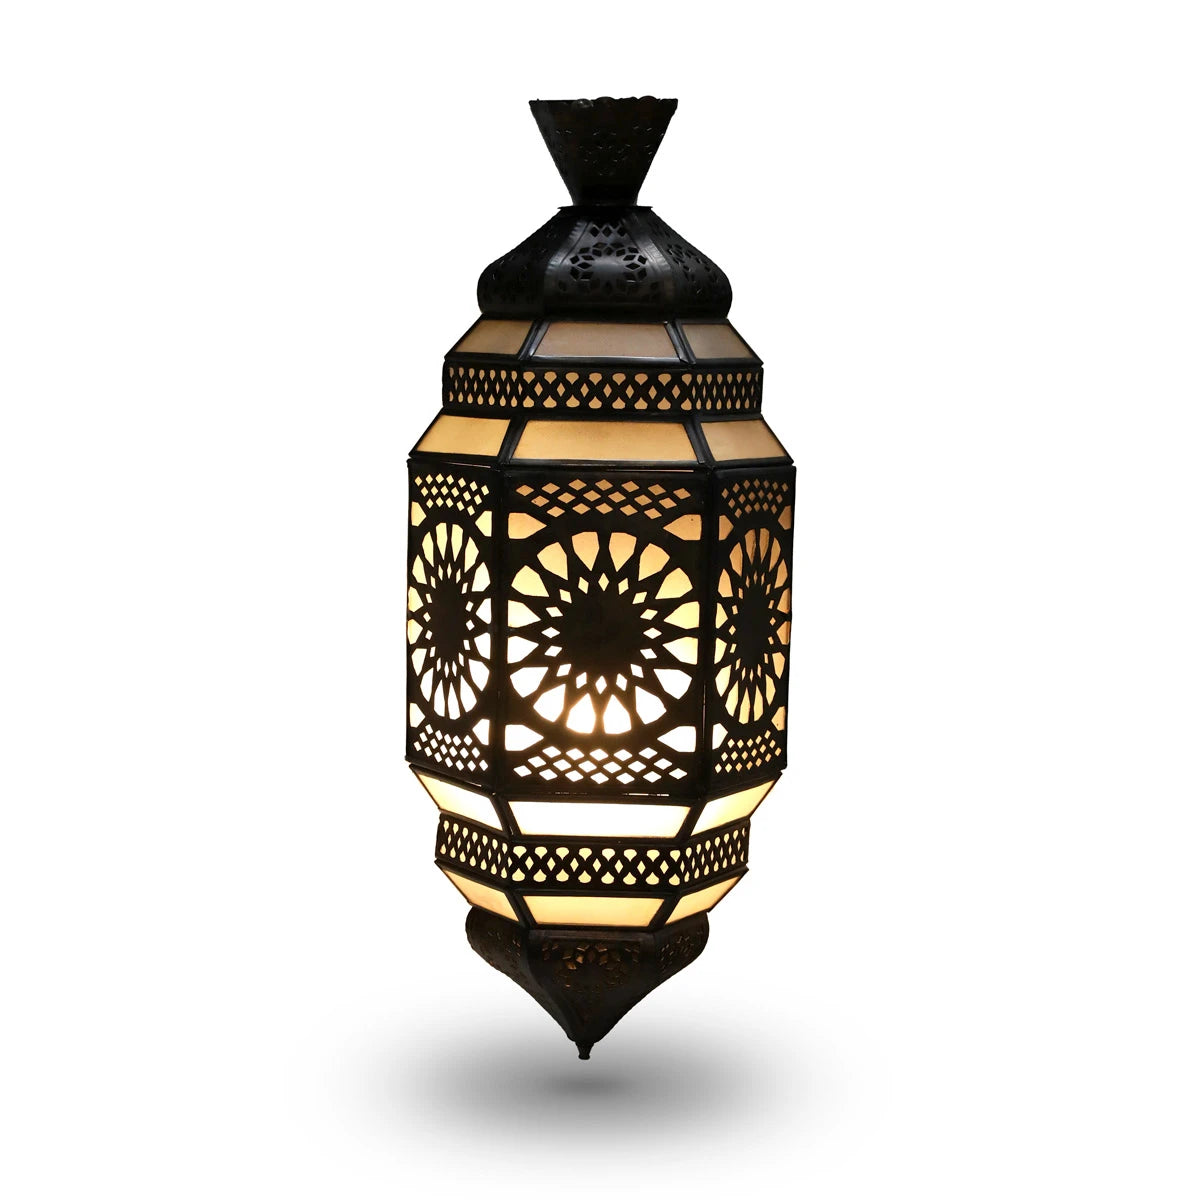 Authentic Syrian Lantern Made of Brass with Open Cut Work Design in Traditional Geometrical Motifs